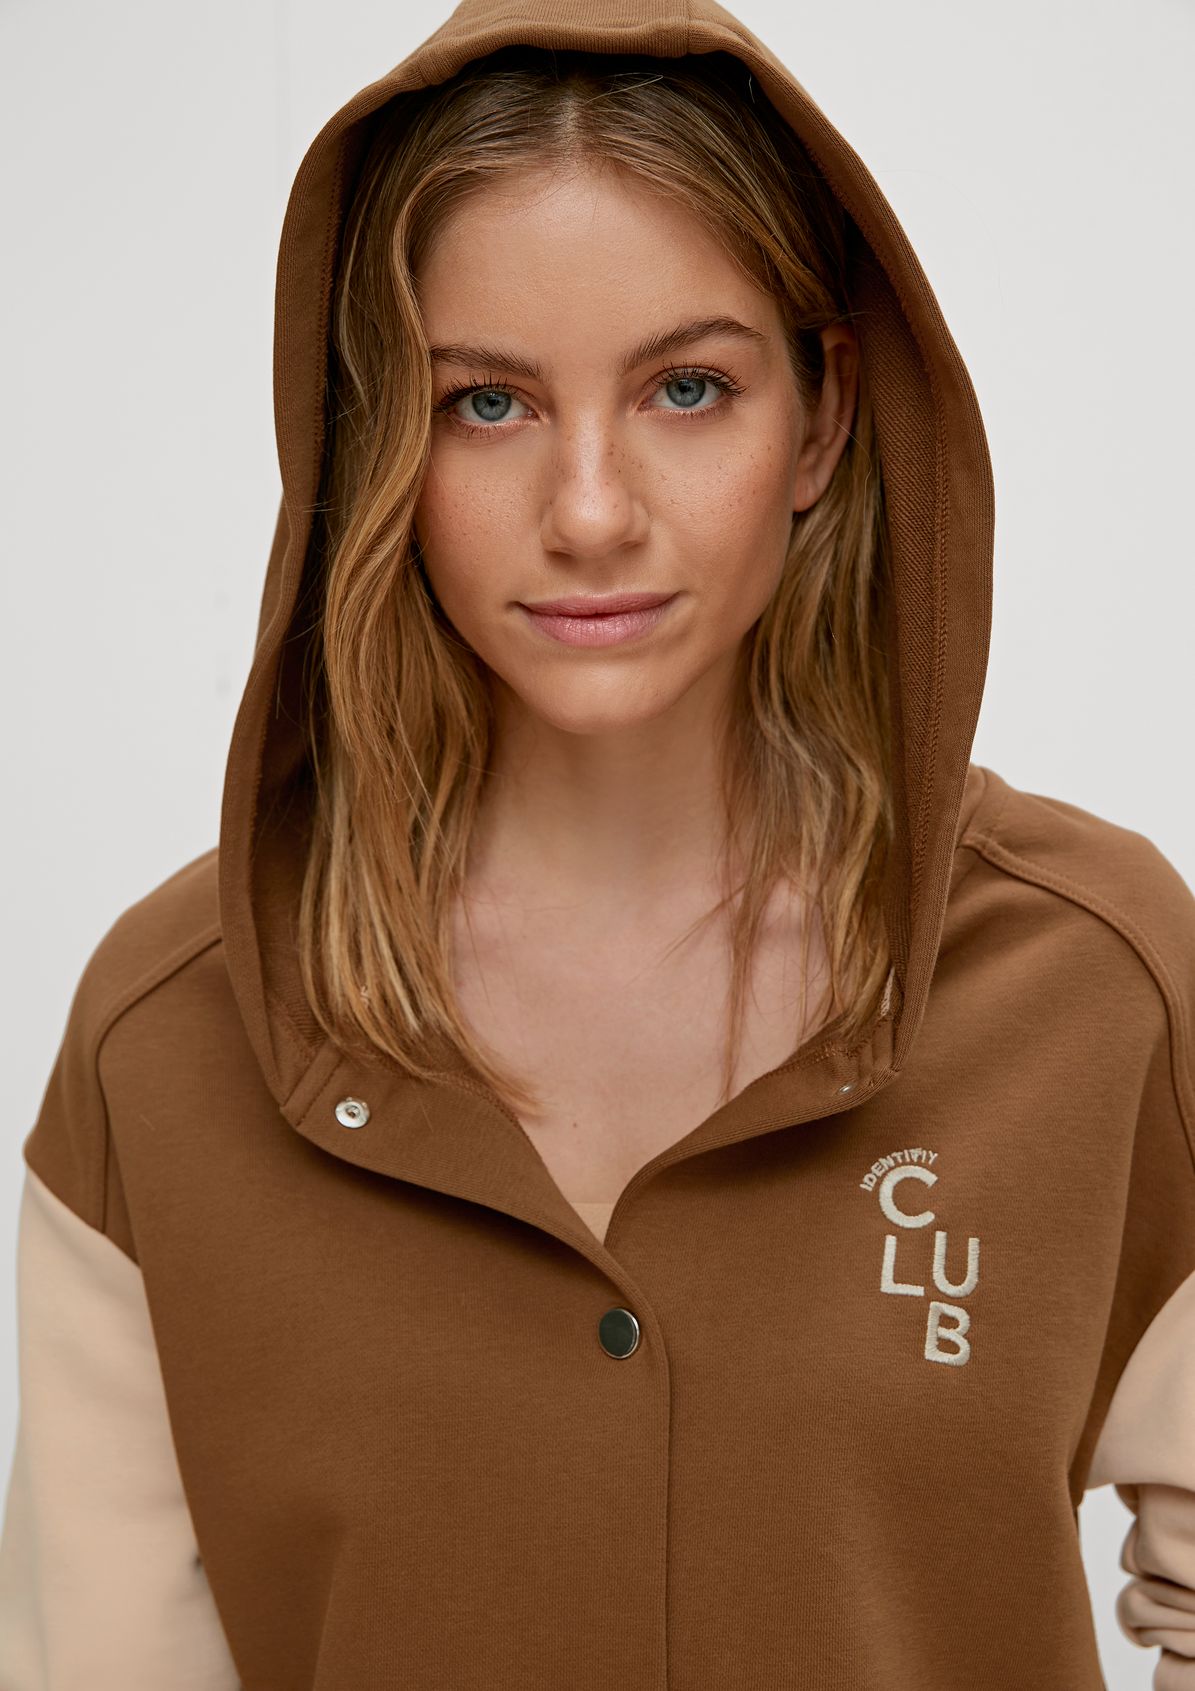 Sweatshirt jacket in a college style from comma